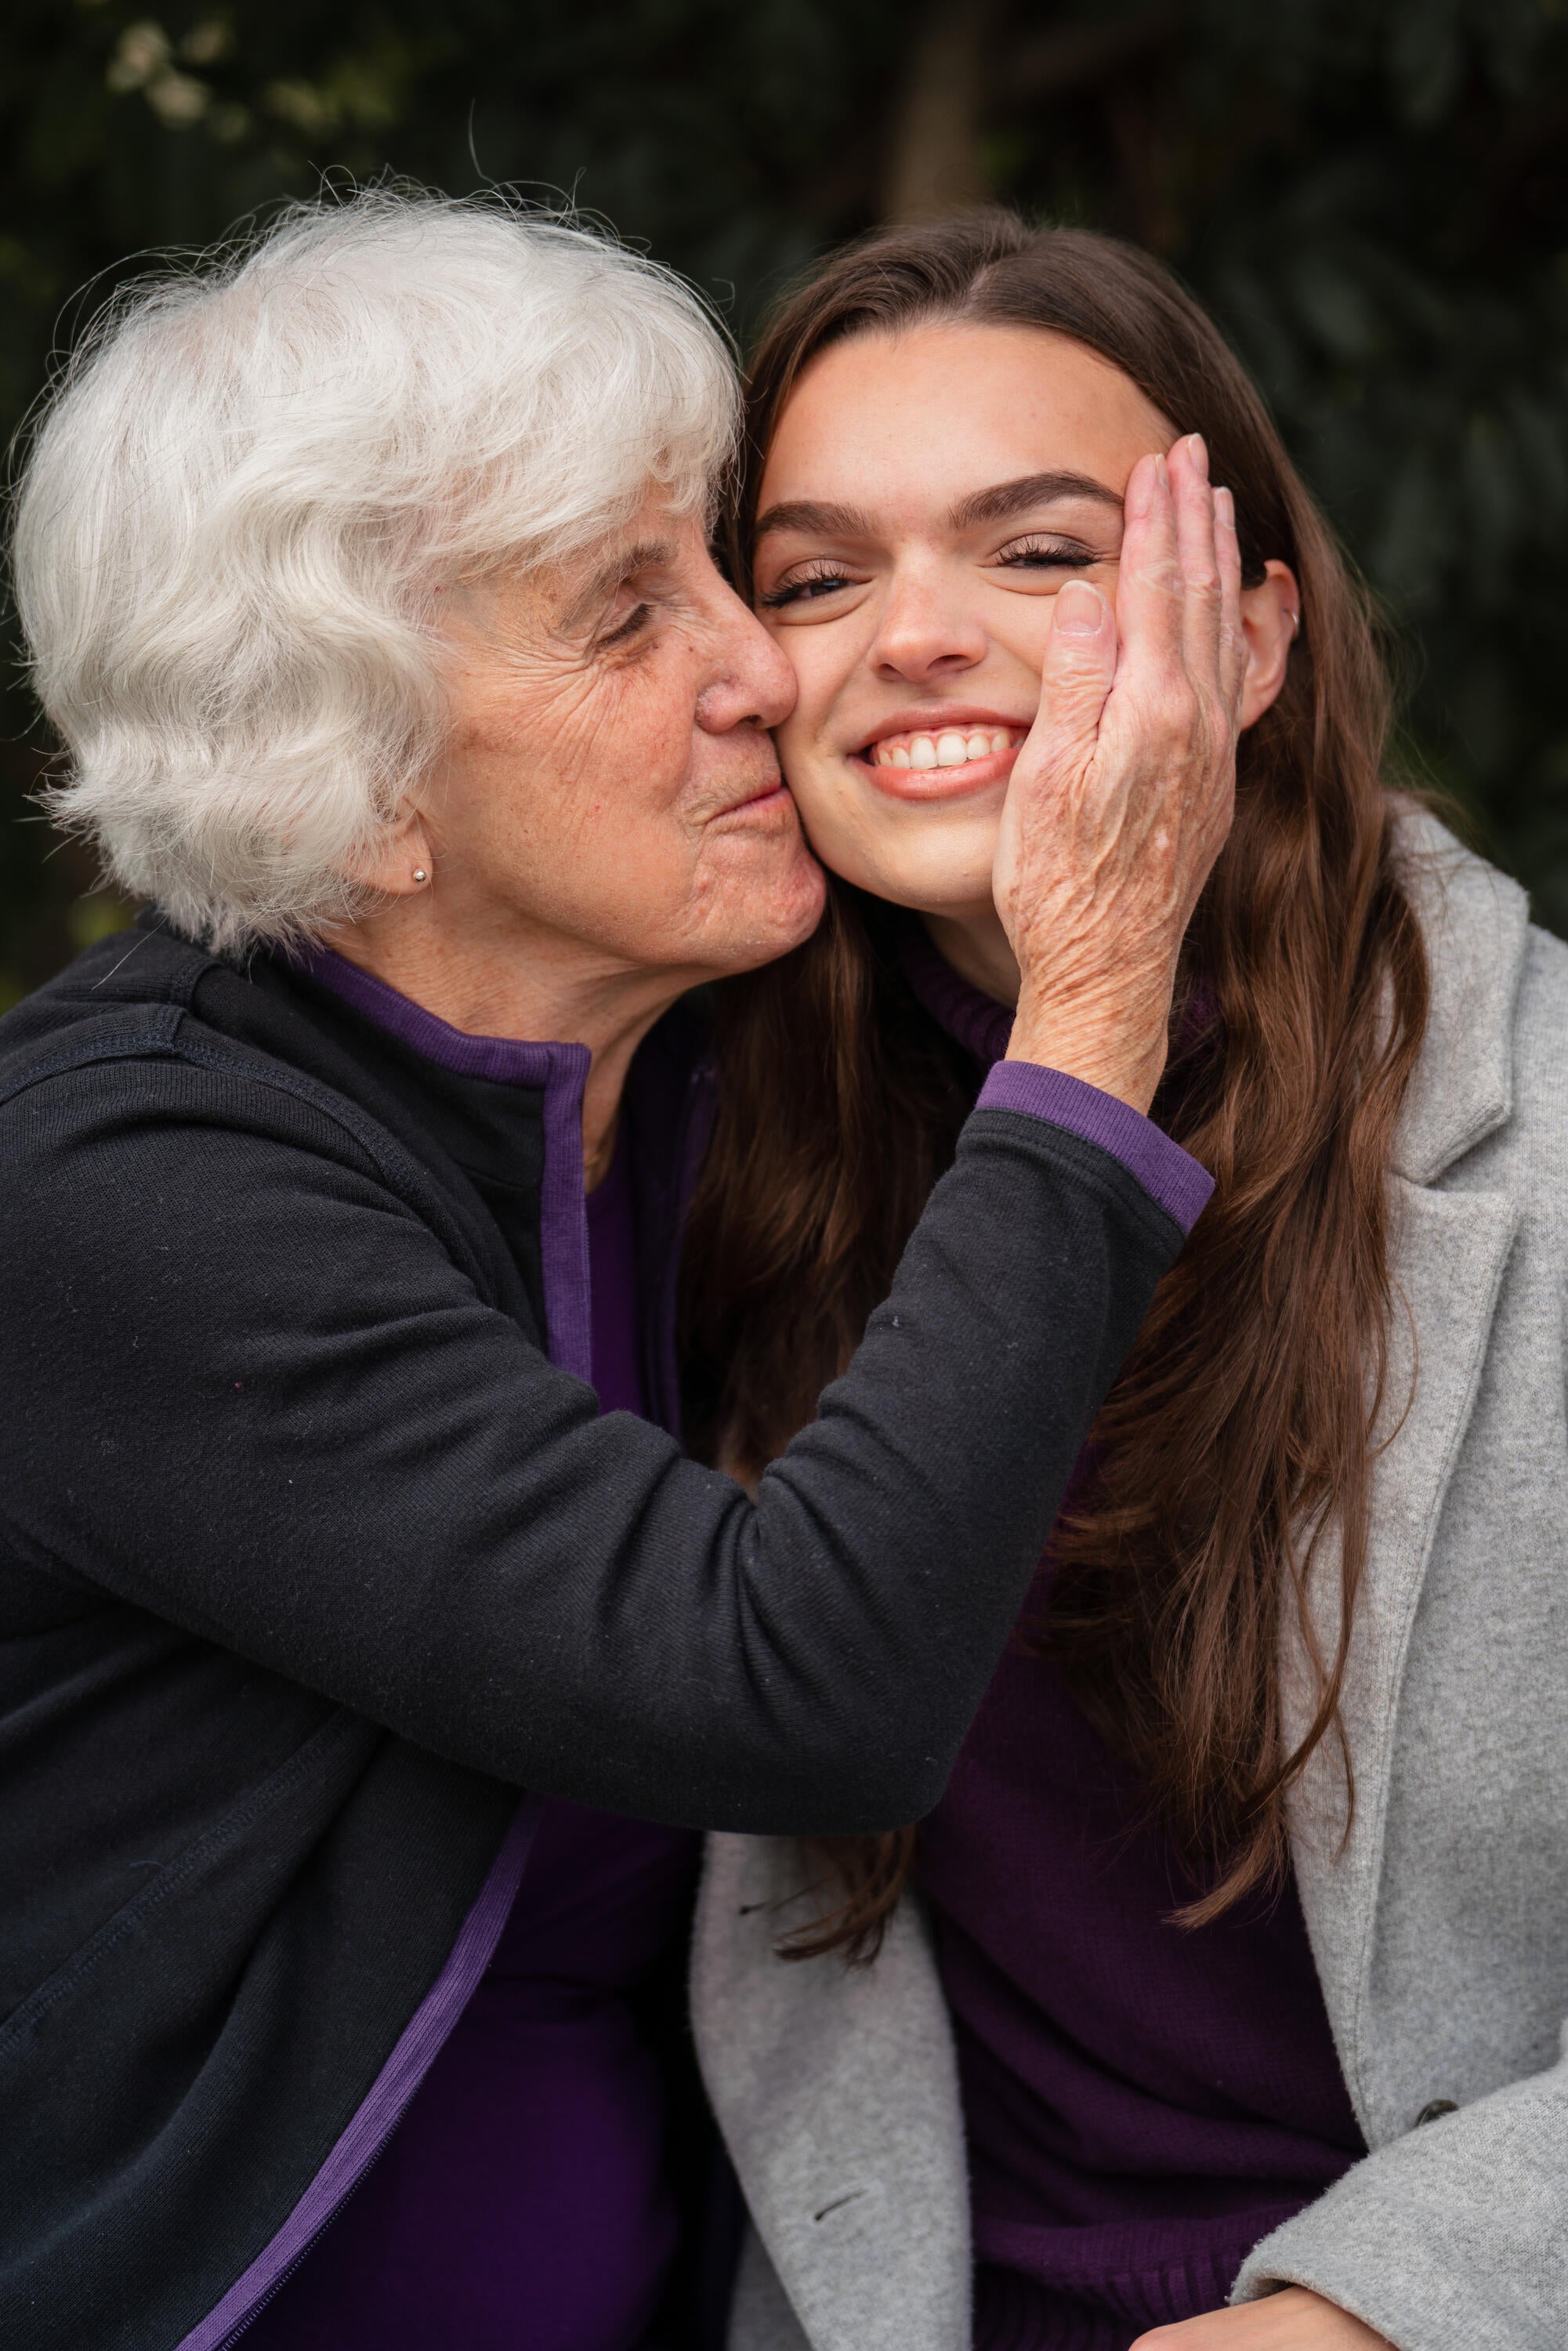 Aubrey with an older woman embracing her. 